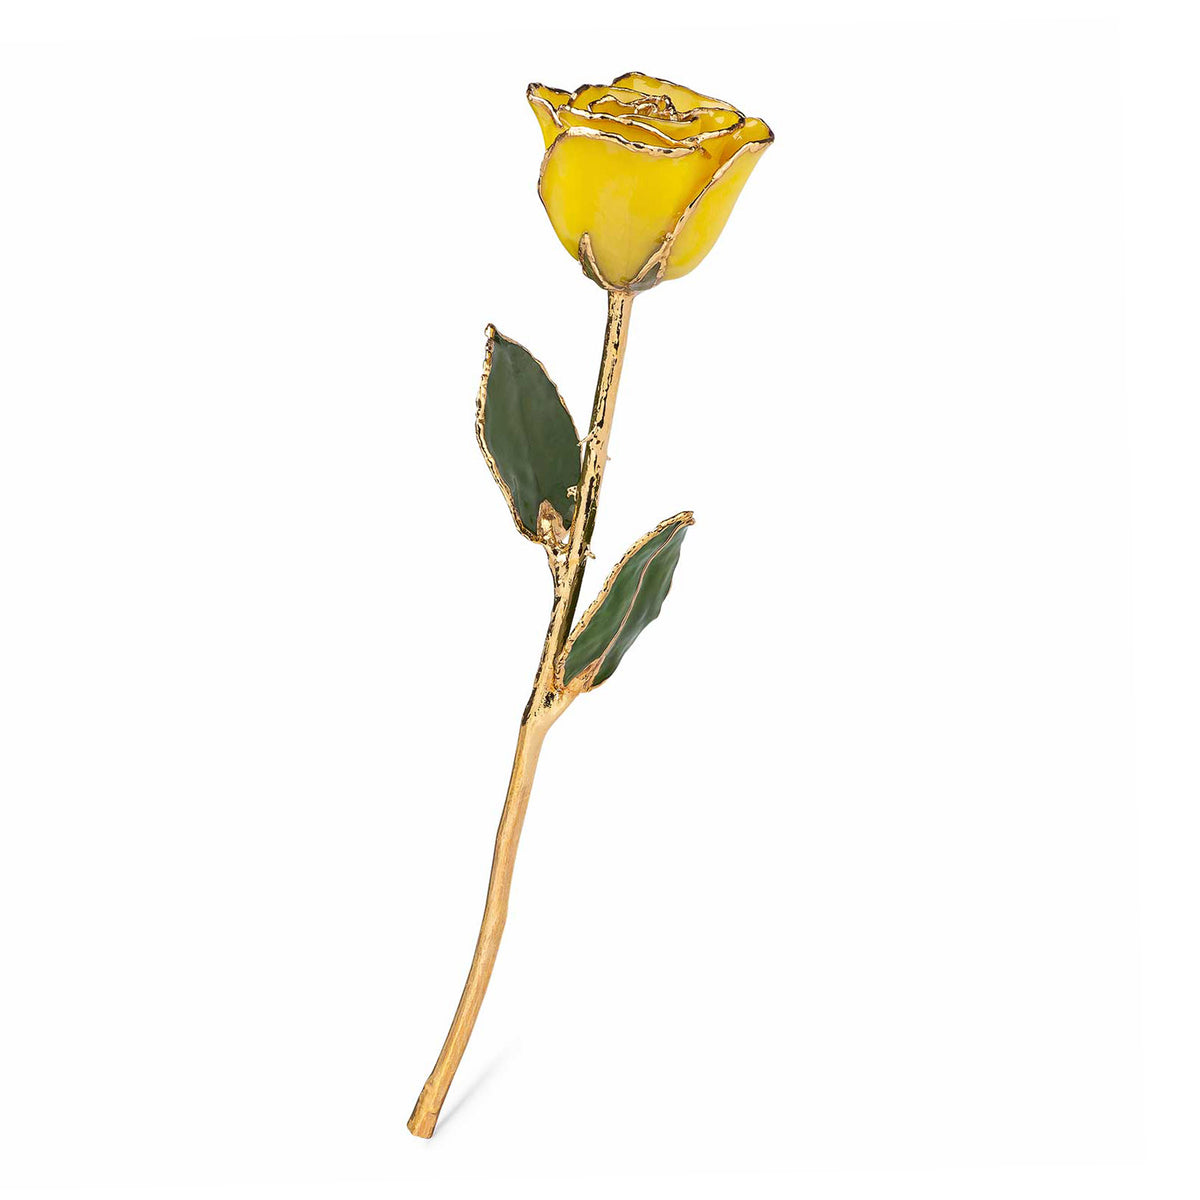 24K Gold Trimmed Forever Rose with Yellow Petals. View of Stem, Leaves, and Rose Petals and Showing Detail of Gold Trim